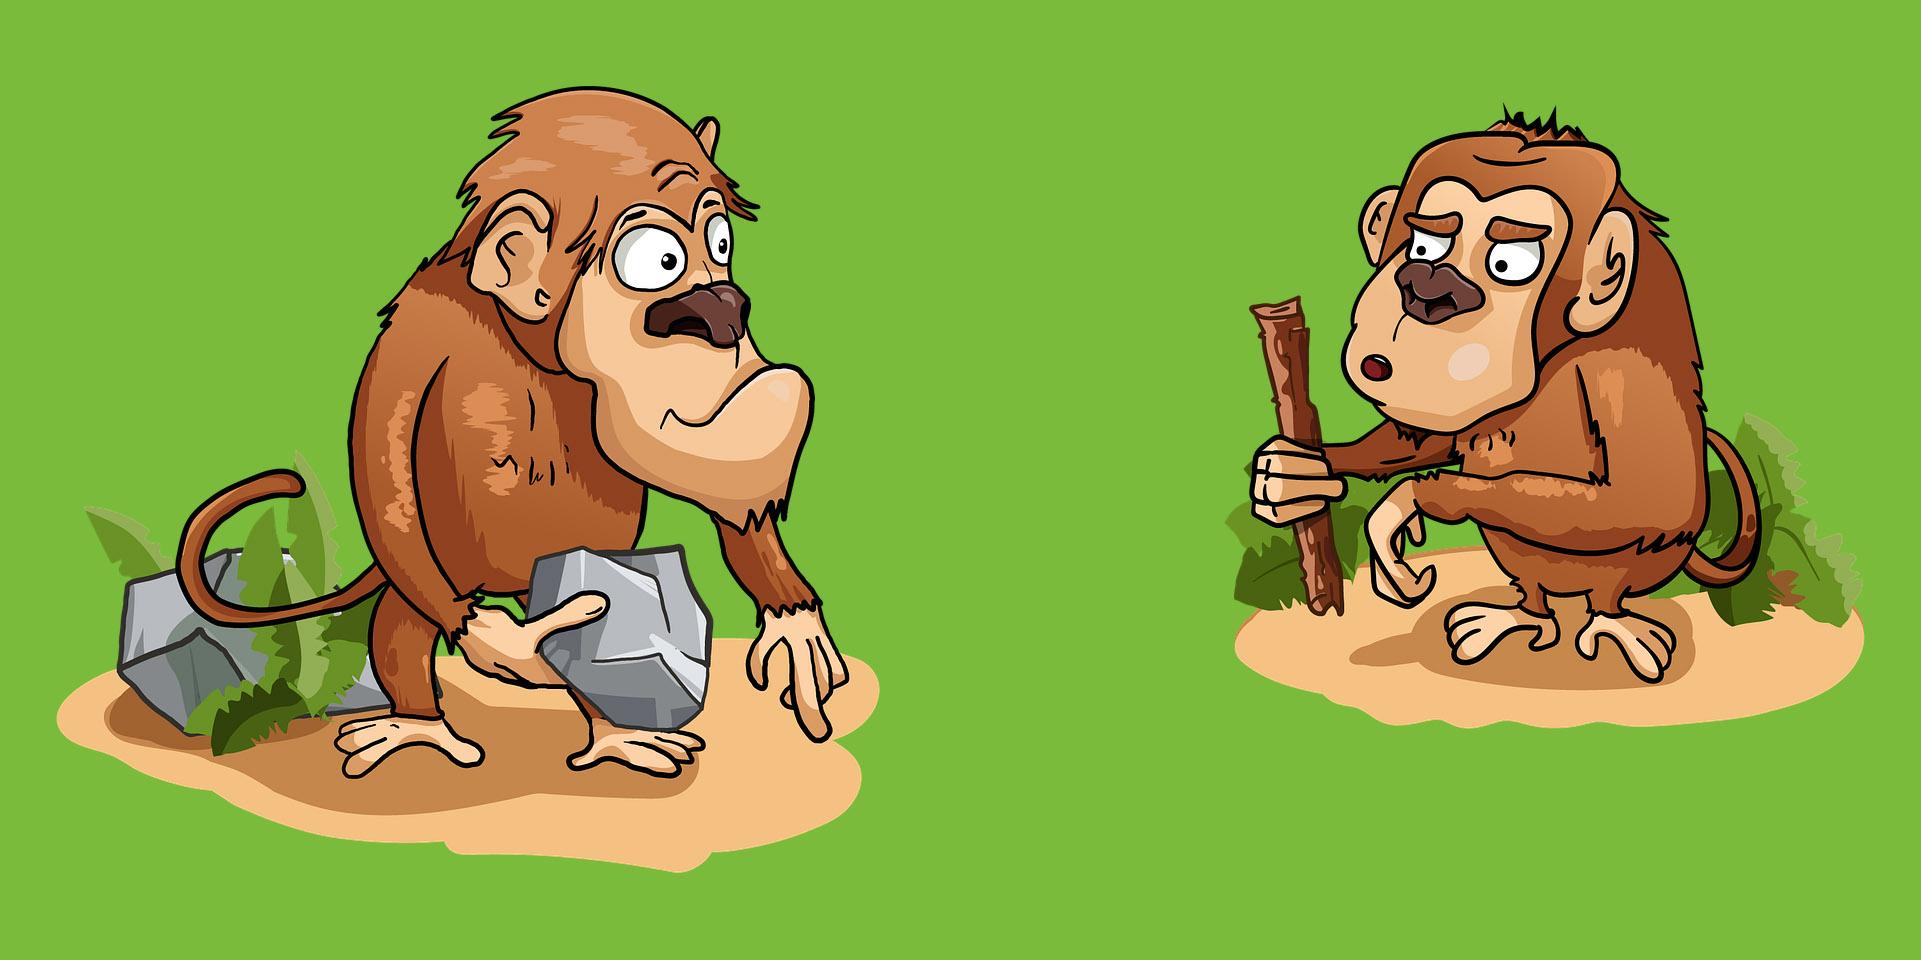 two monkeys with a stick and a stone